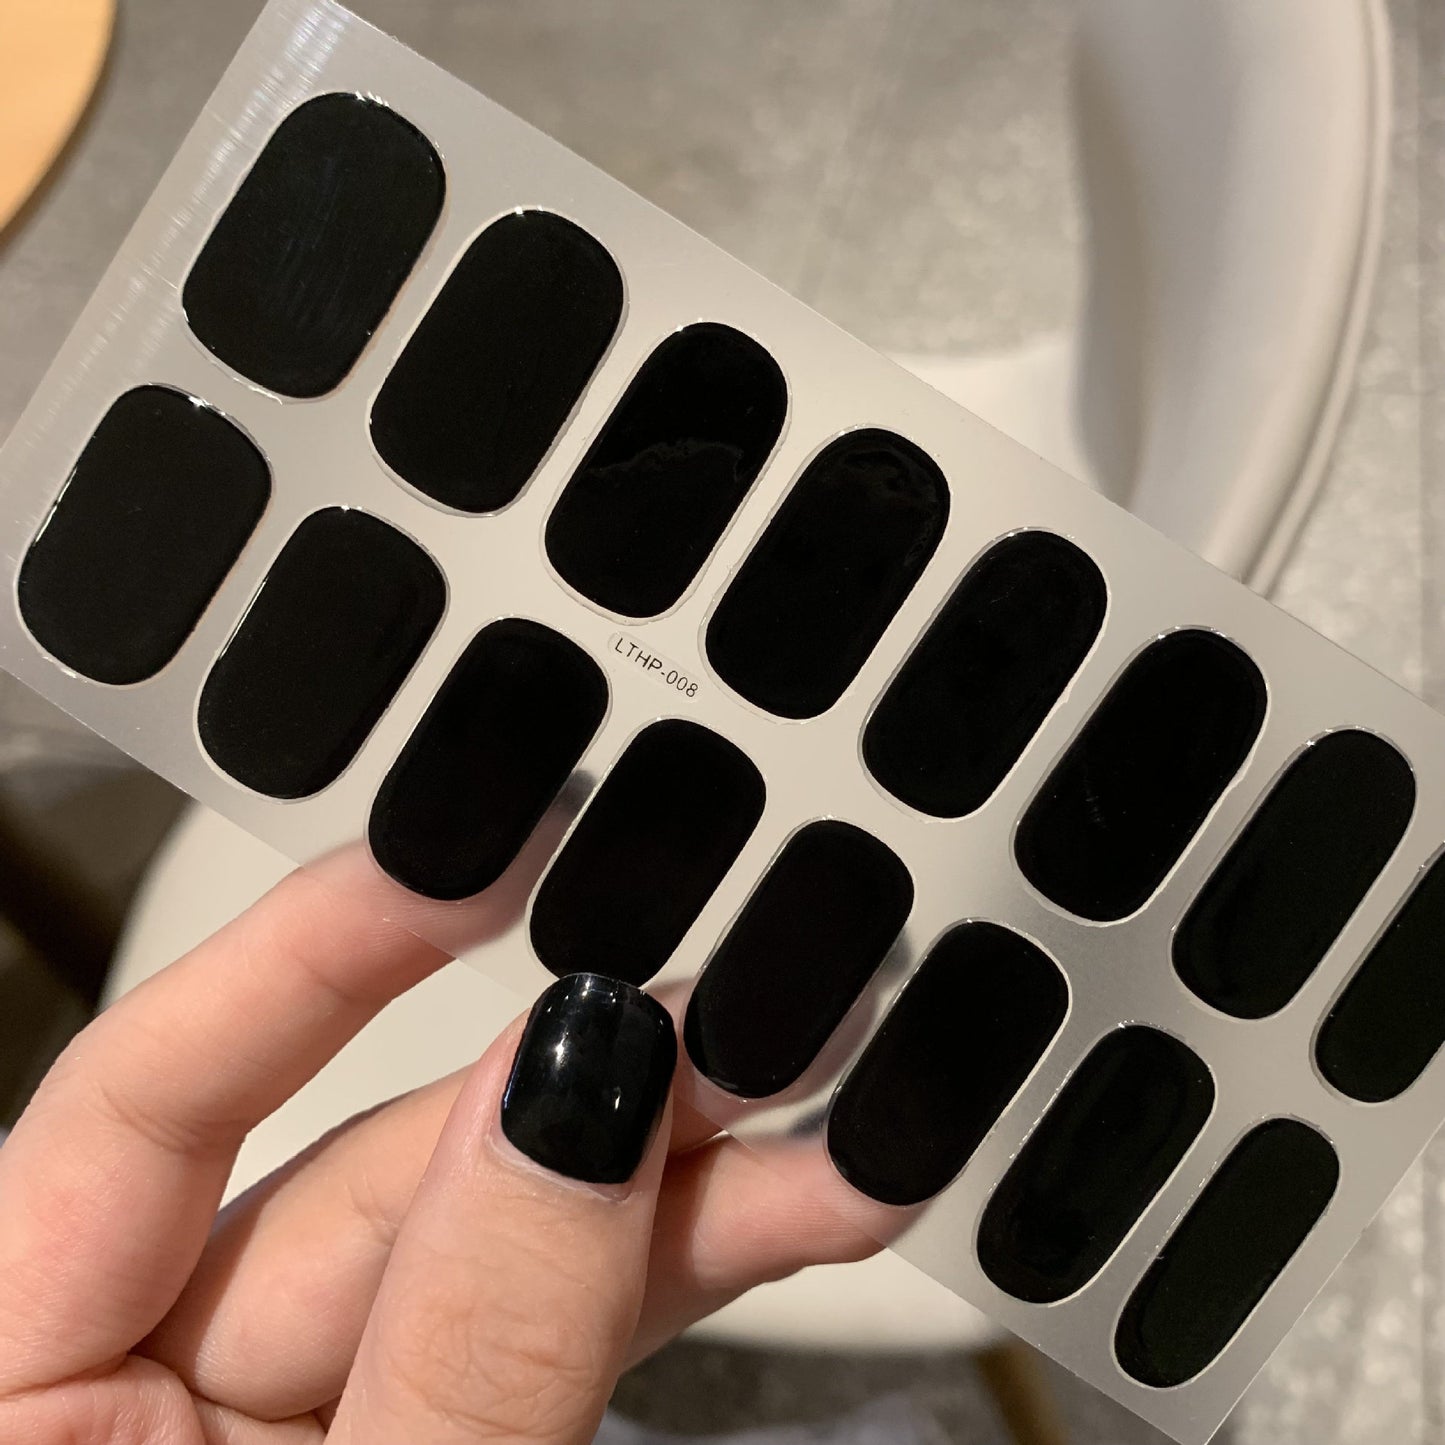 Waterproof And Durable Second Generation Semi-cured UV Nail Beauty Stickers